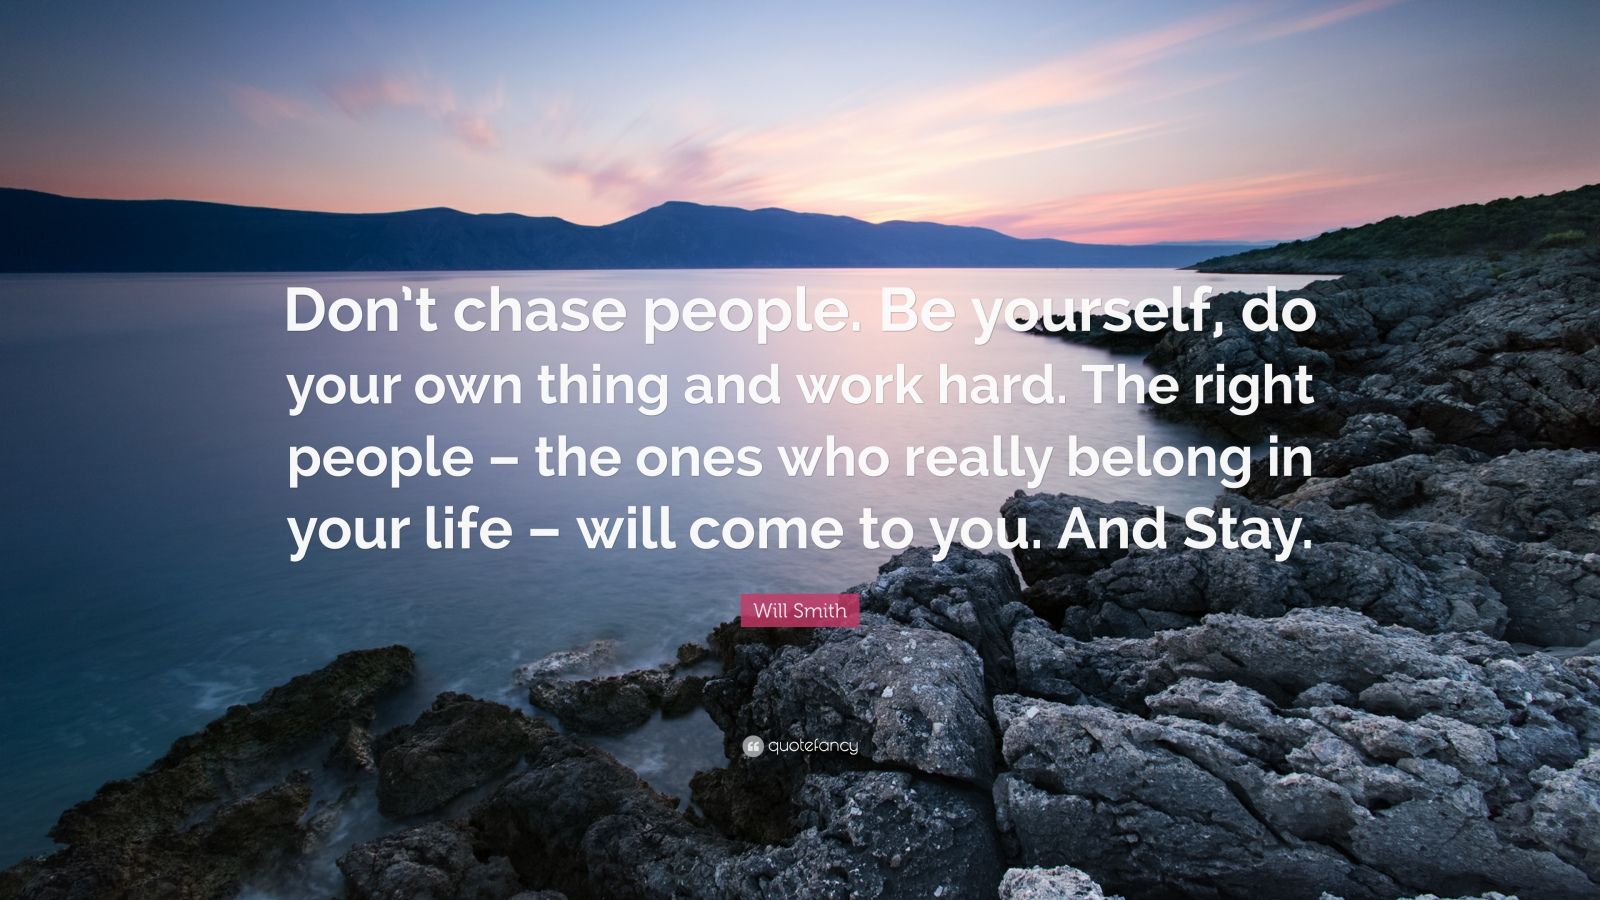 Will Smith Quote “Don t chase people Be yourself do your